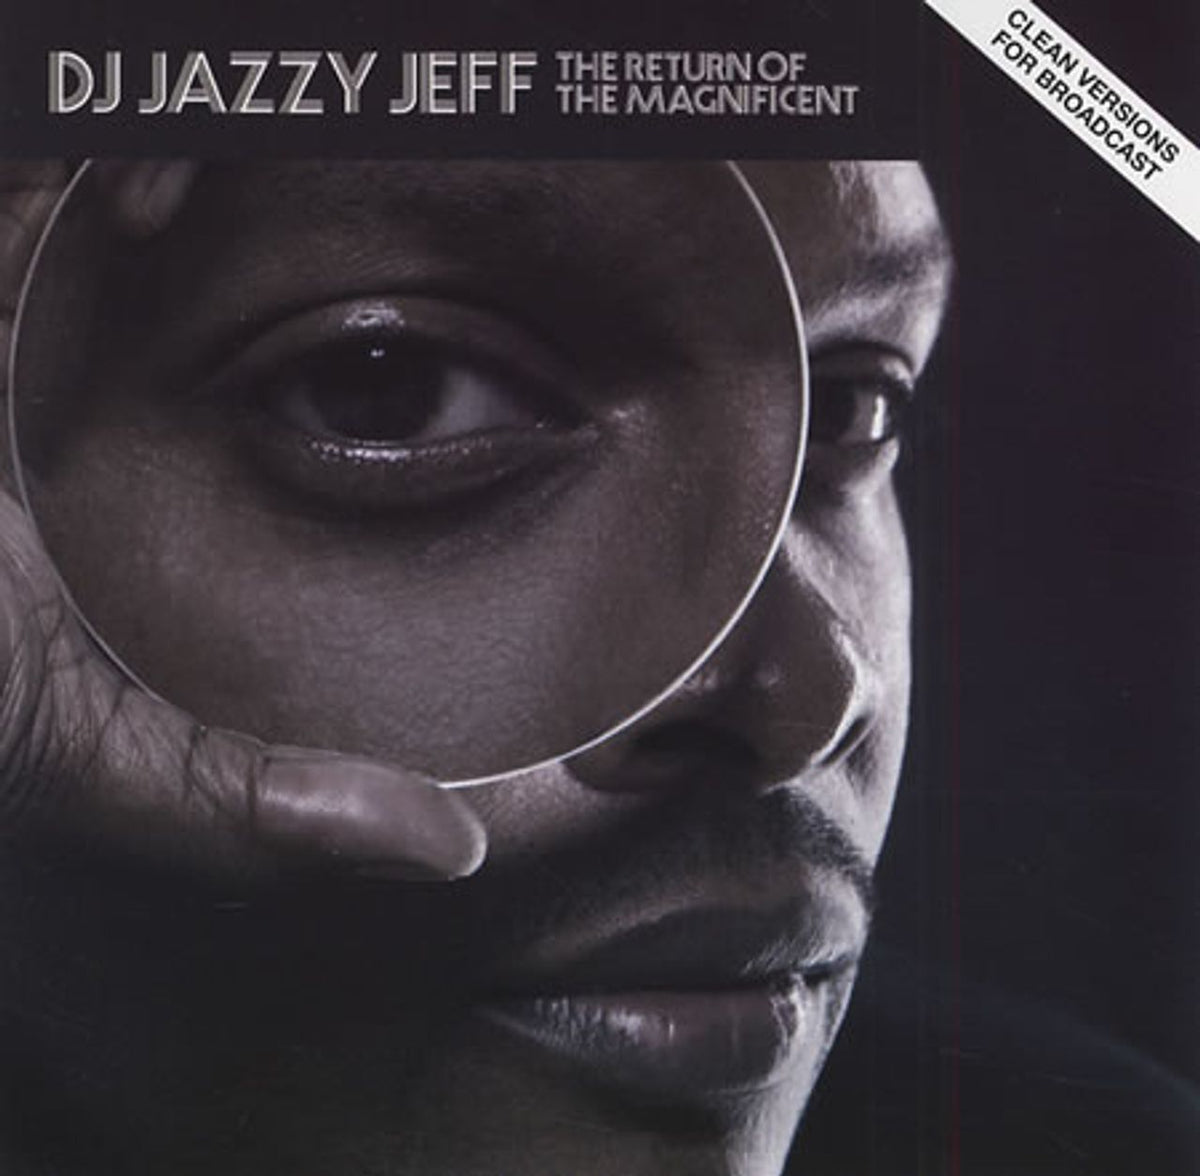 DJ Jazzy Jeff & The Fresh Prince The Return Of The Magnificent - Clean  Versions US Promo CD album